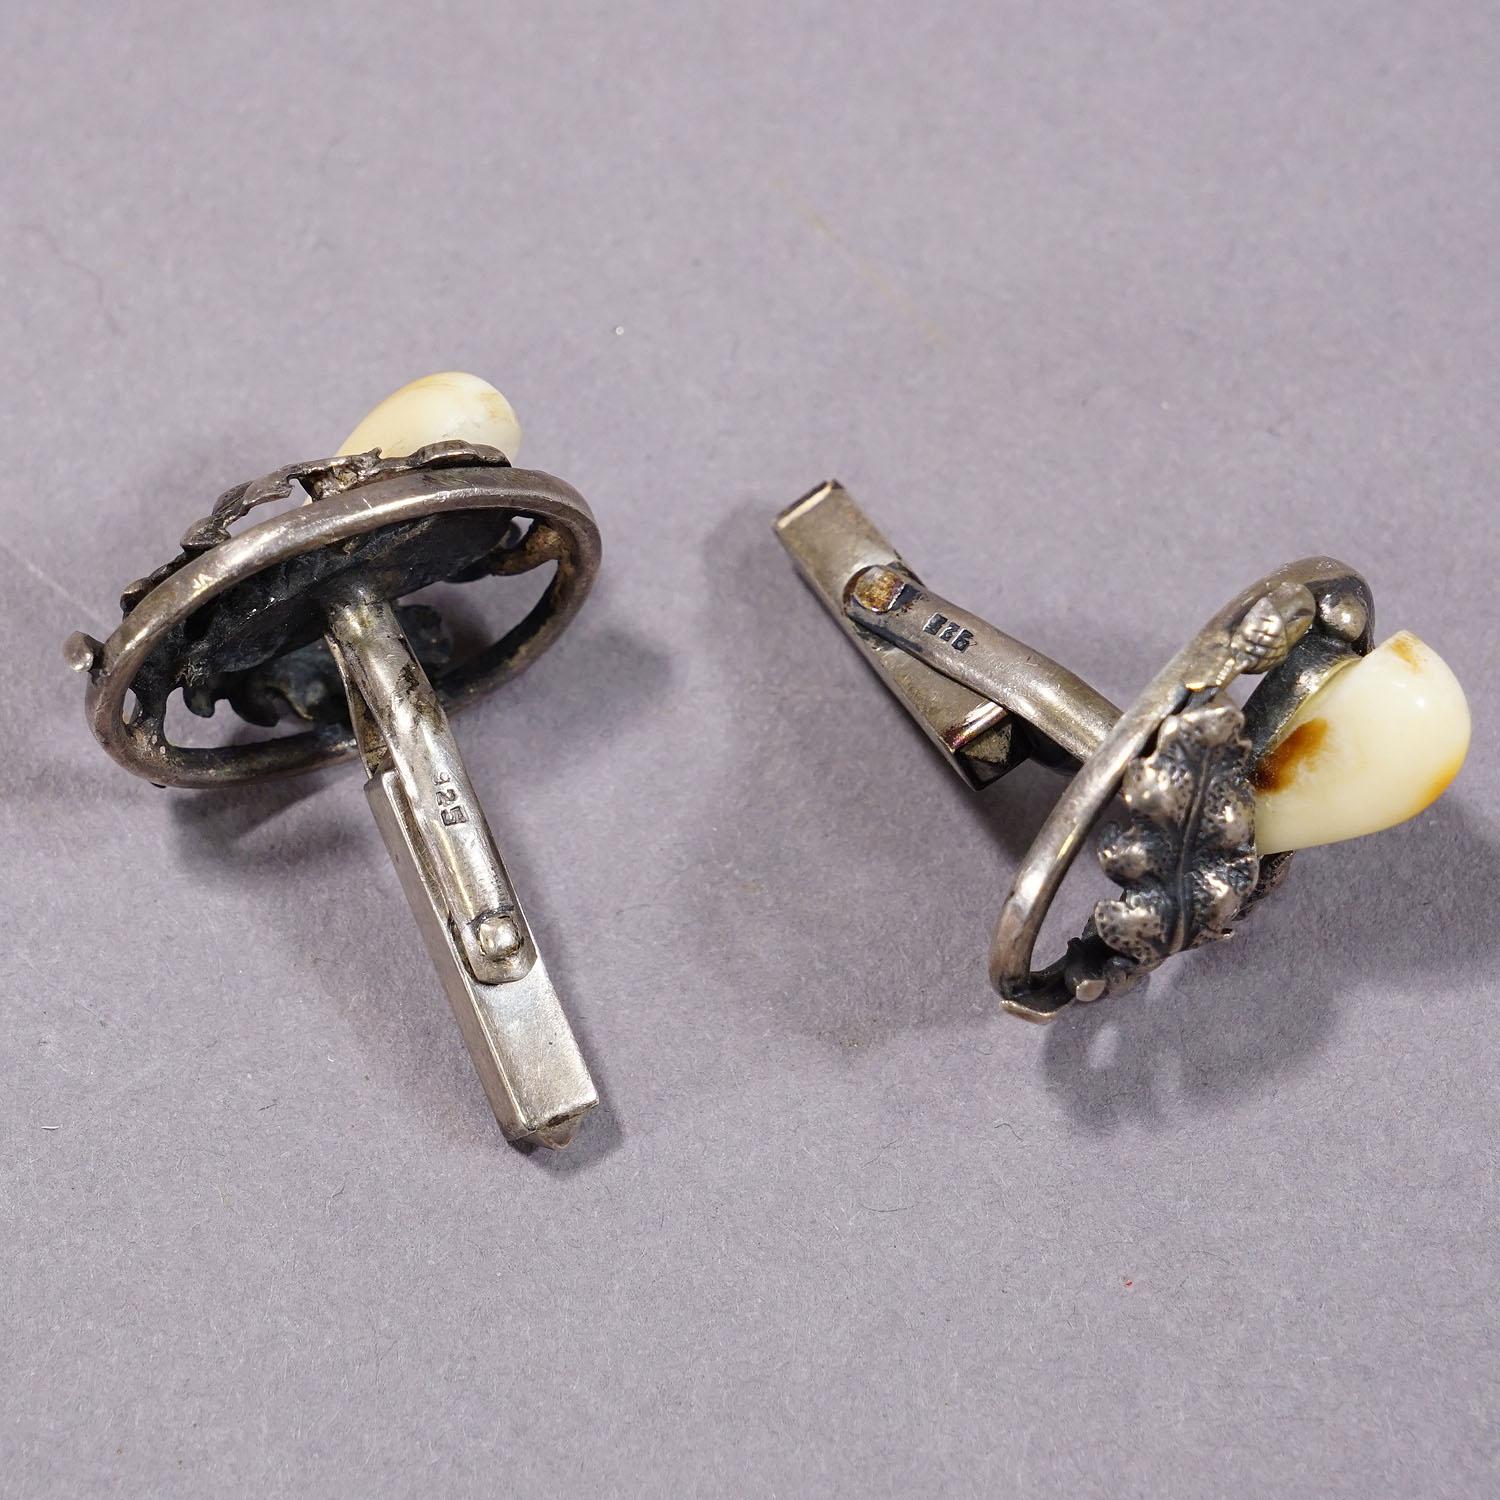 Vintage Bavarian Traditional Costume Jewelry Cufflinks In Good Condition For Sale In Berghuelen, DE